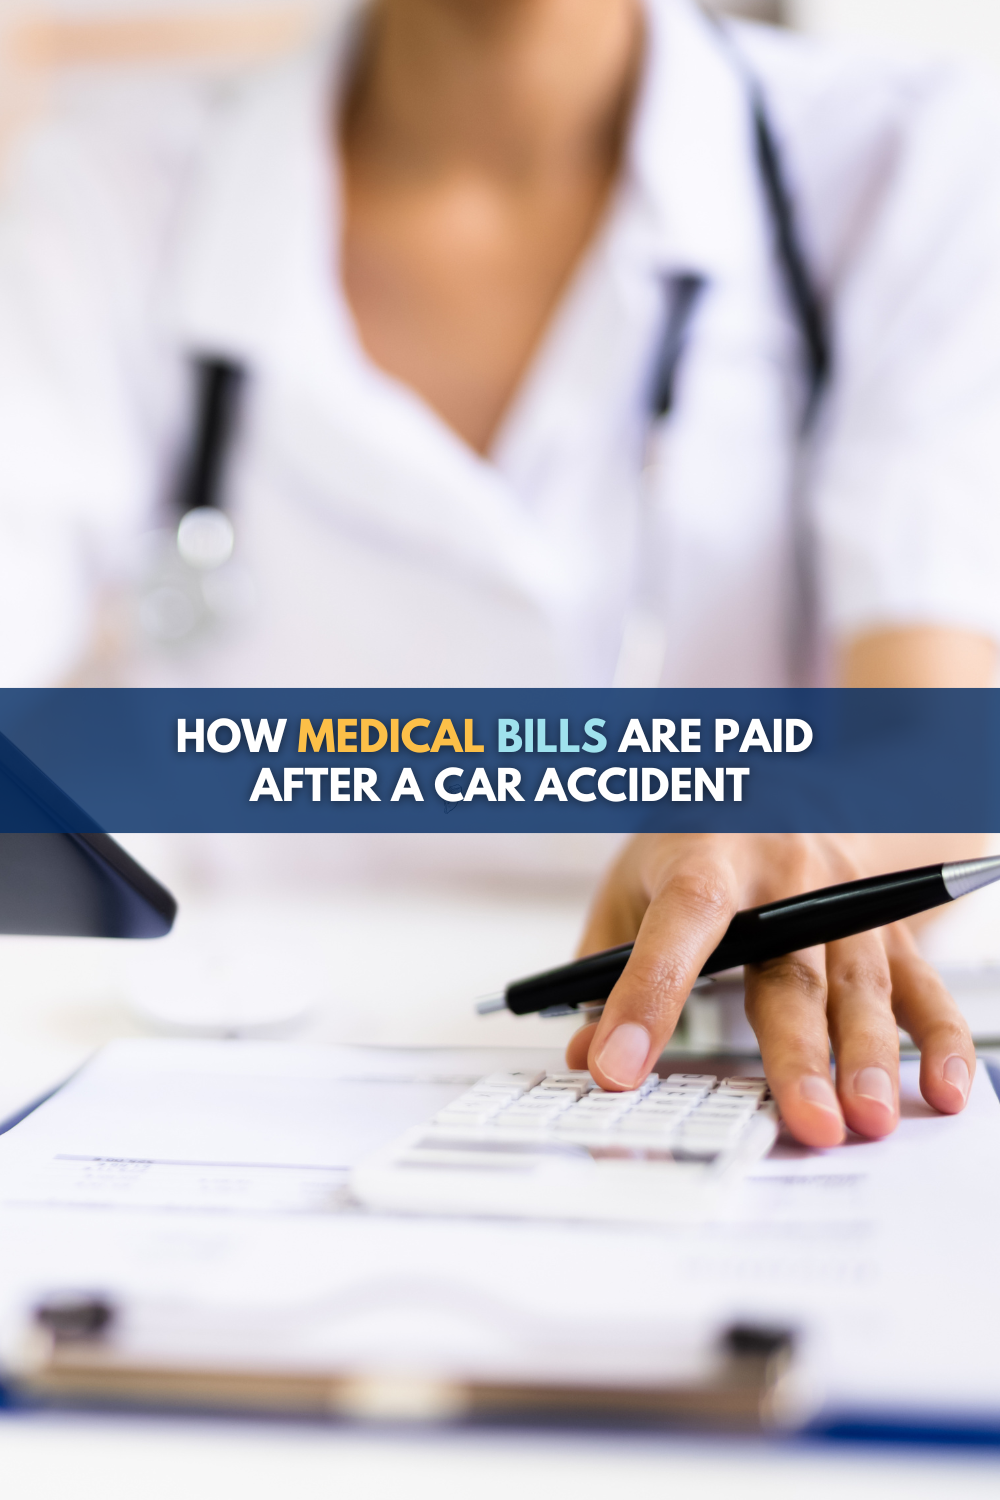 How Medical Bills Are Paid After A Car Accident: Who Pays?